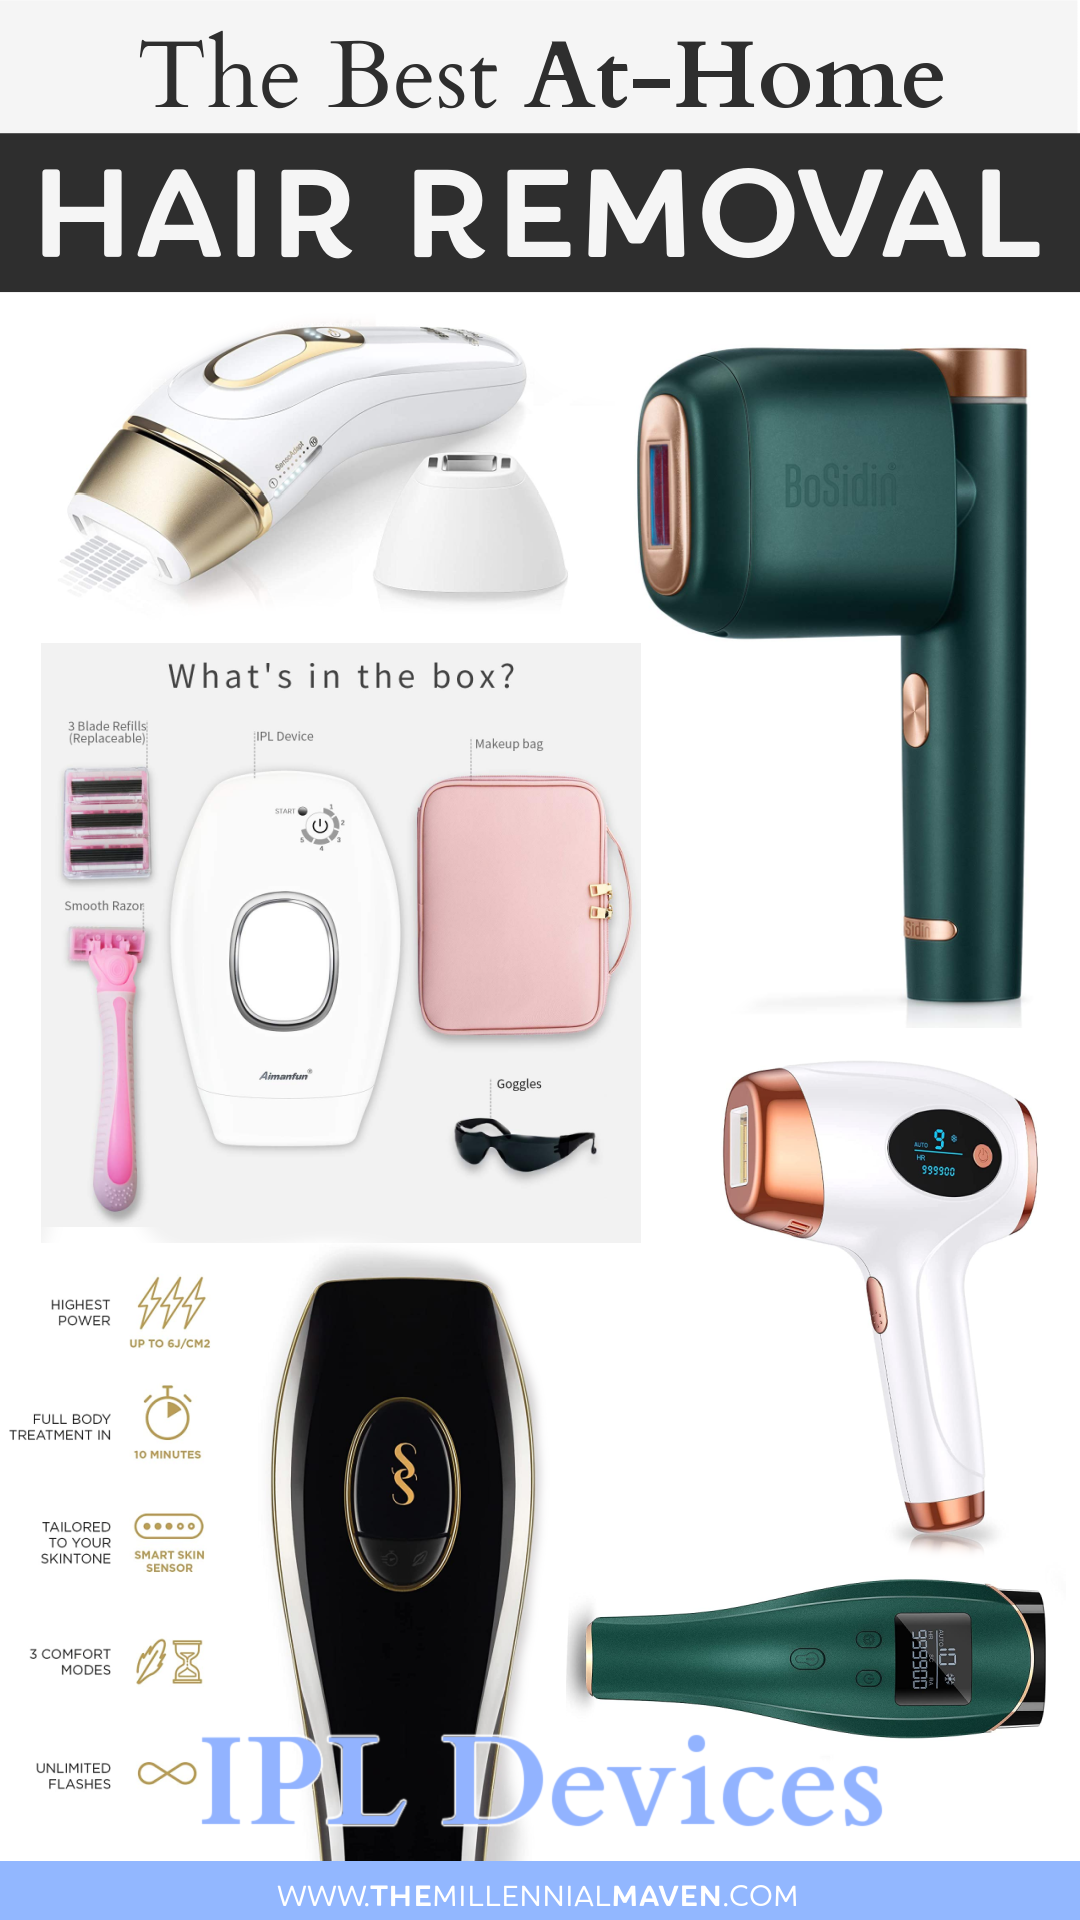 Do At-Home IPL Devices *Actually* Work? Your burning IPL hair removal questions answered by science!